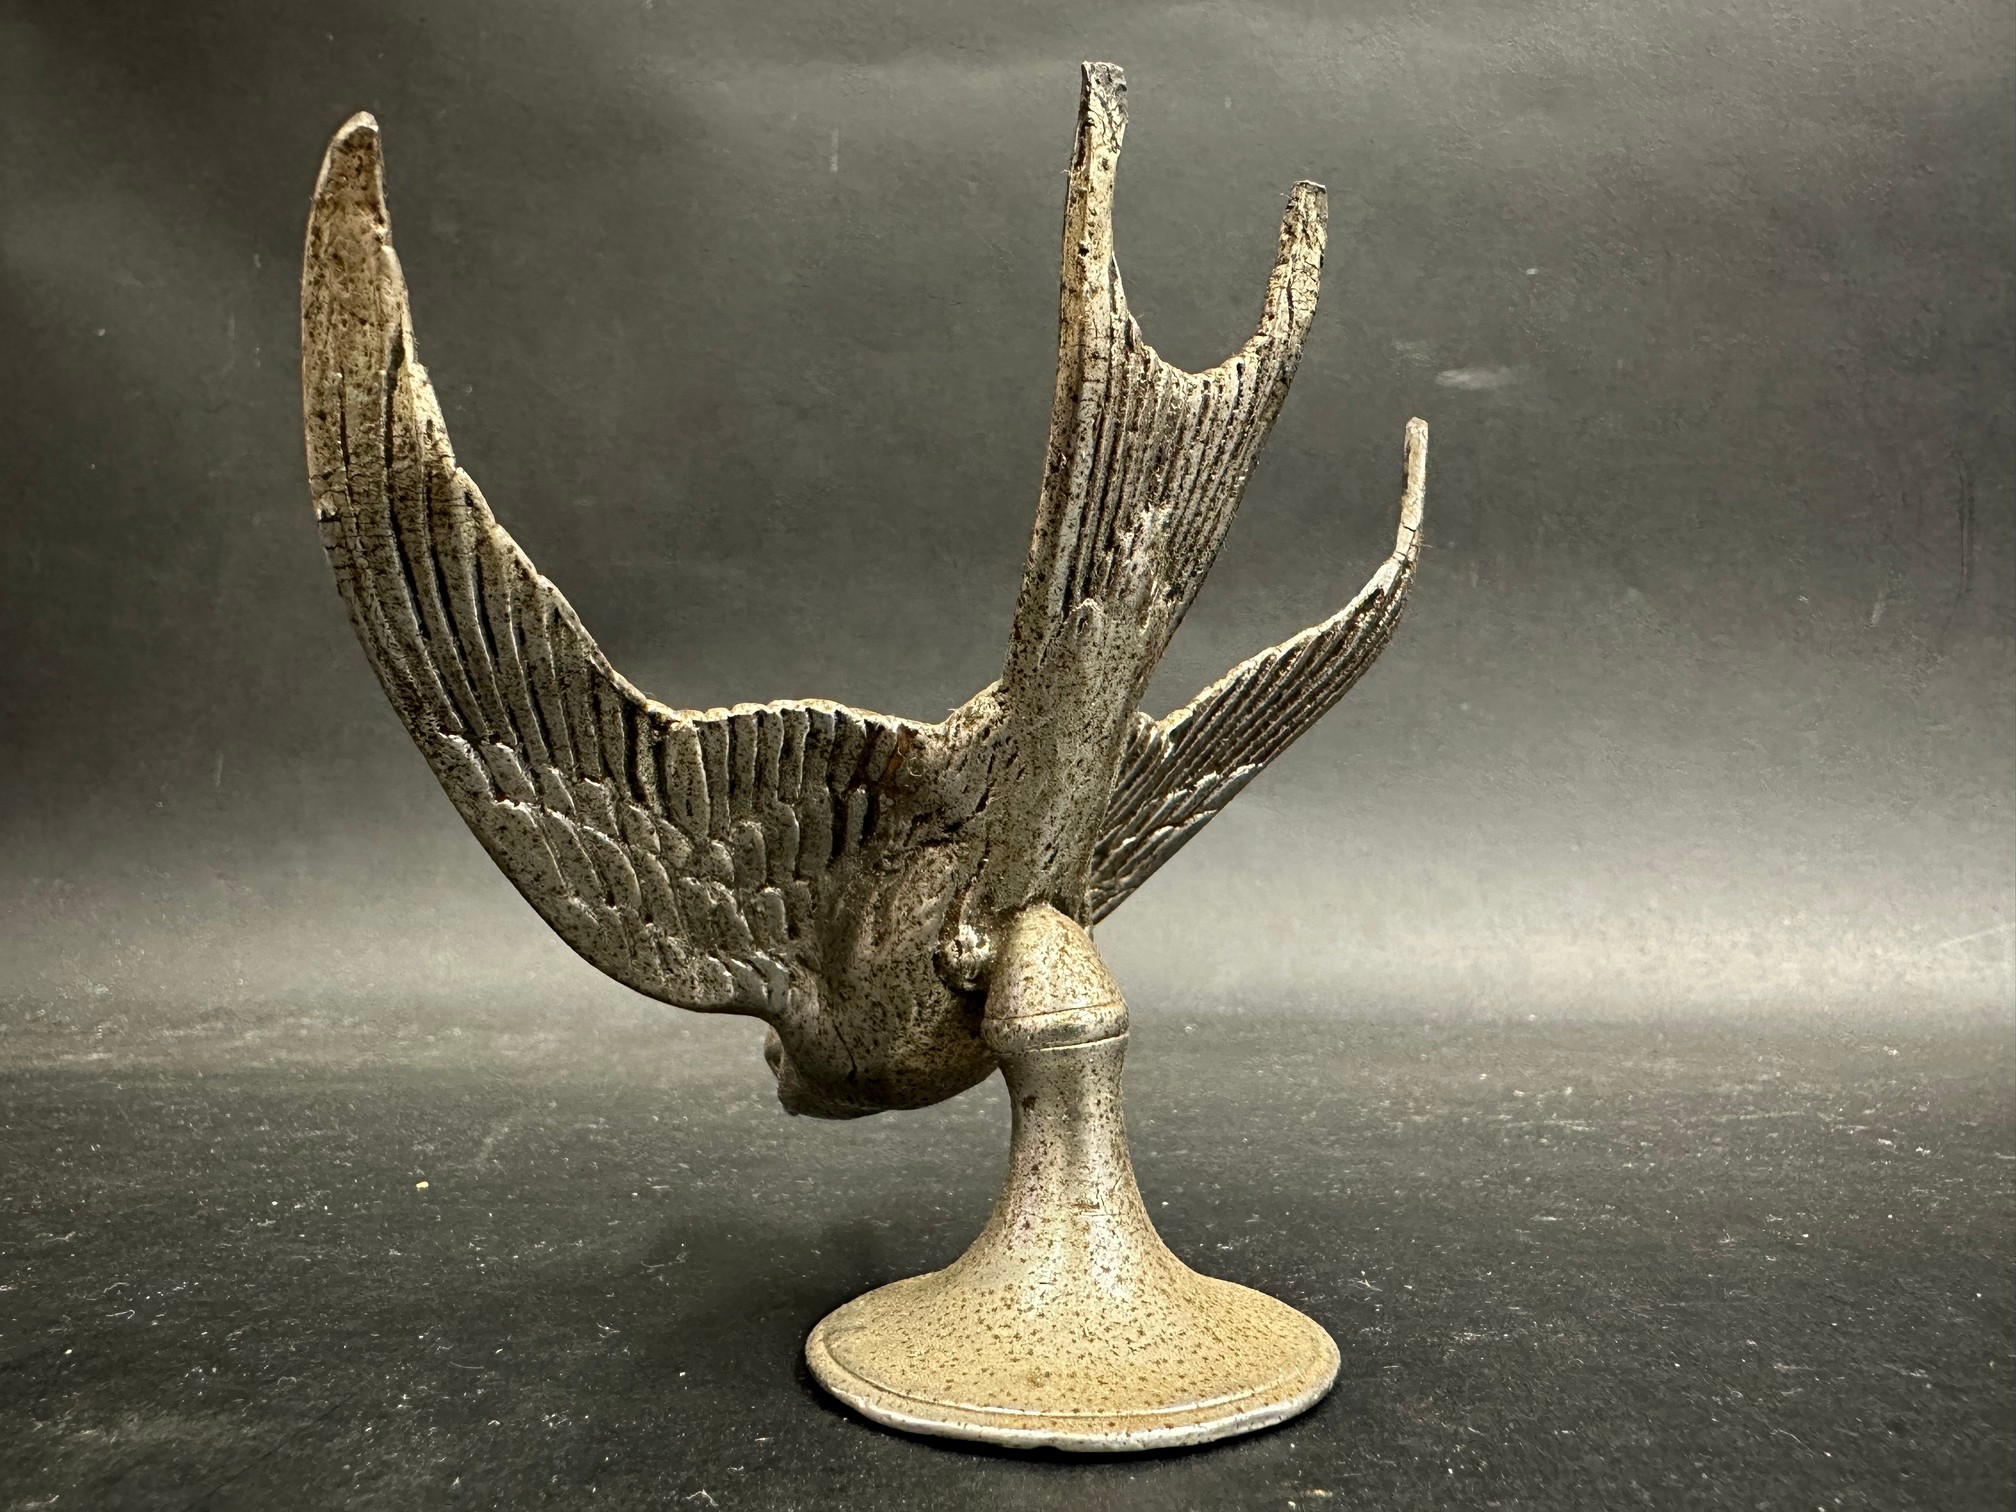 A Swift Cars mascot in the form of a diving swift, approx. 4" high. - Image 3 of 3